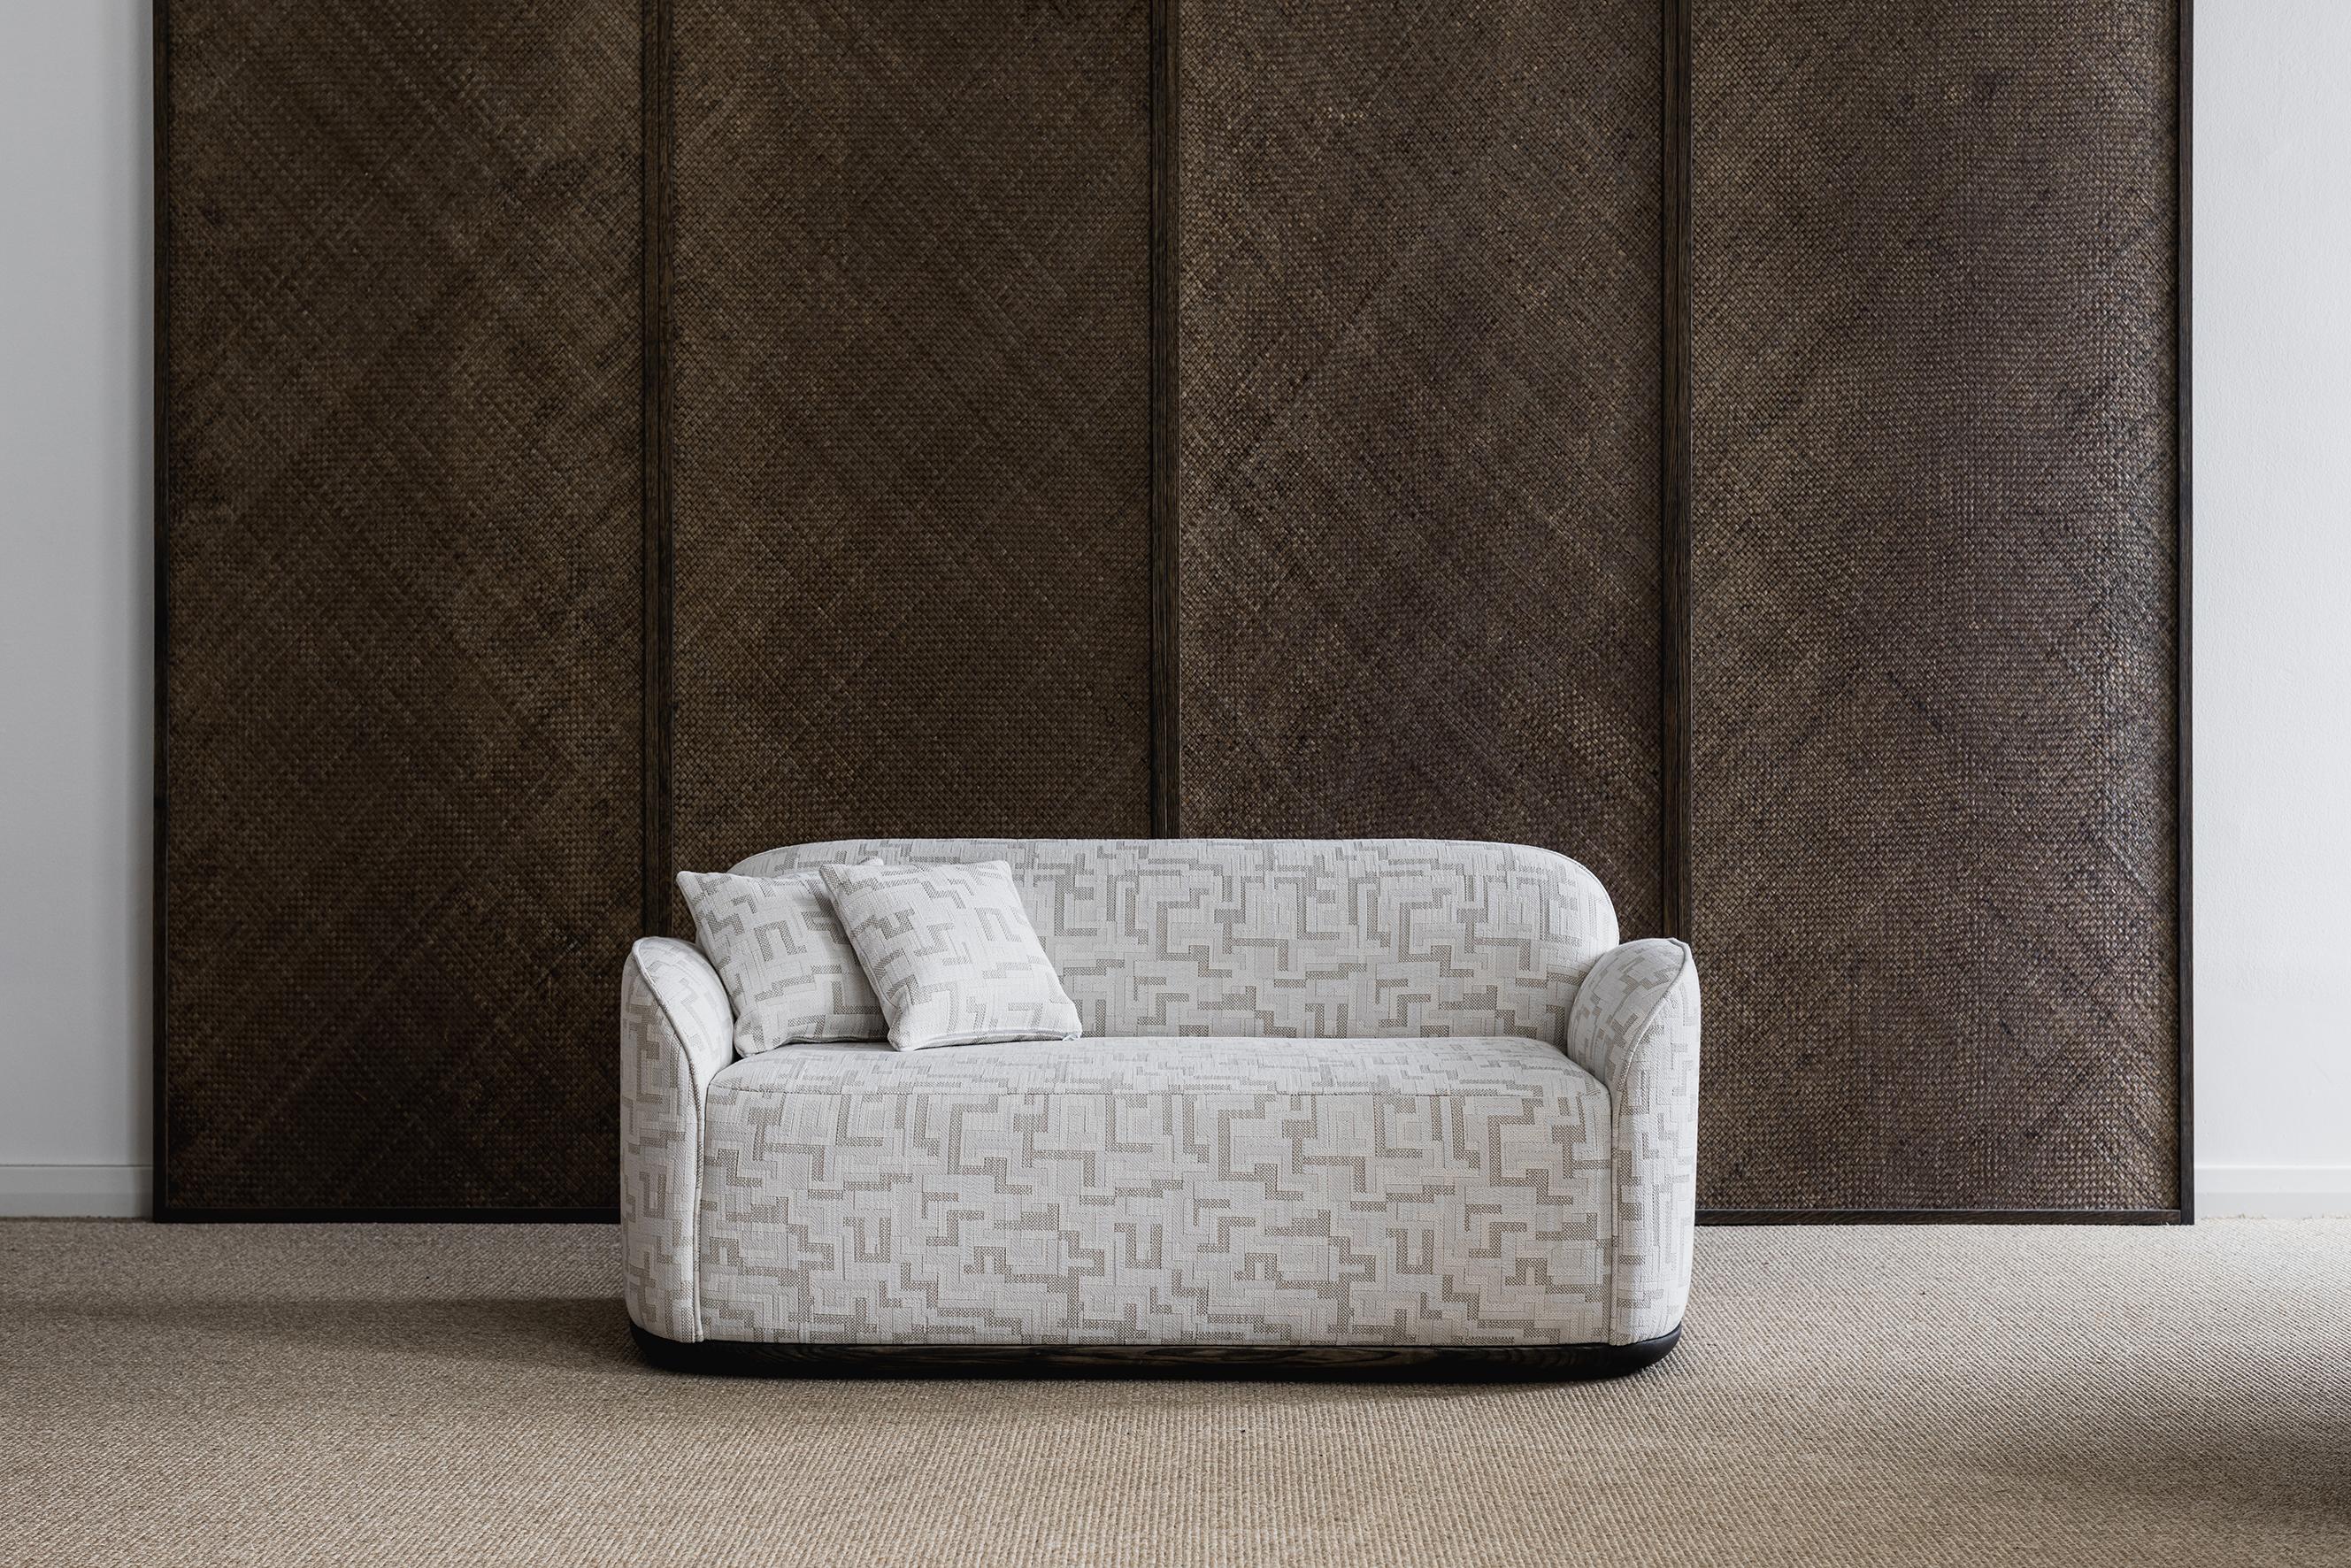 Unio Loveseat by Poiat 
Designers: Timo Mikkonen & Antti Rouhunkoski 

Collection UNIO 2021

Dimensions: H. 72 x W. 150 D. 72 SH. 40
Model shown: Cat 3 01 Écru Eined - Dedar
 
The Unio Collection, featuring an armchair and sofas, opens a new